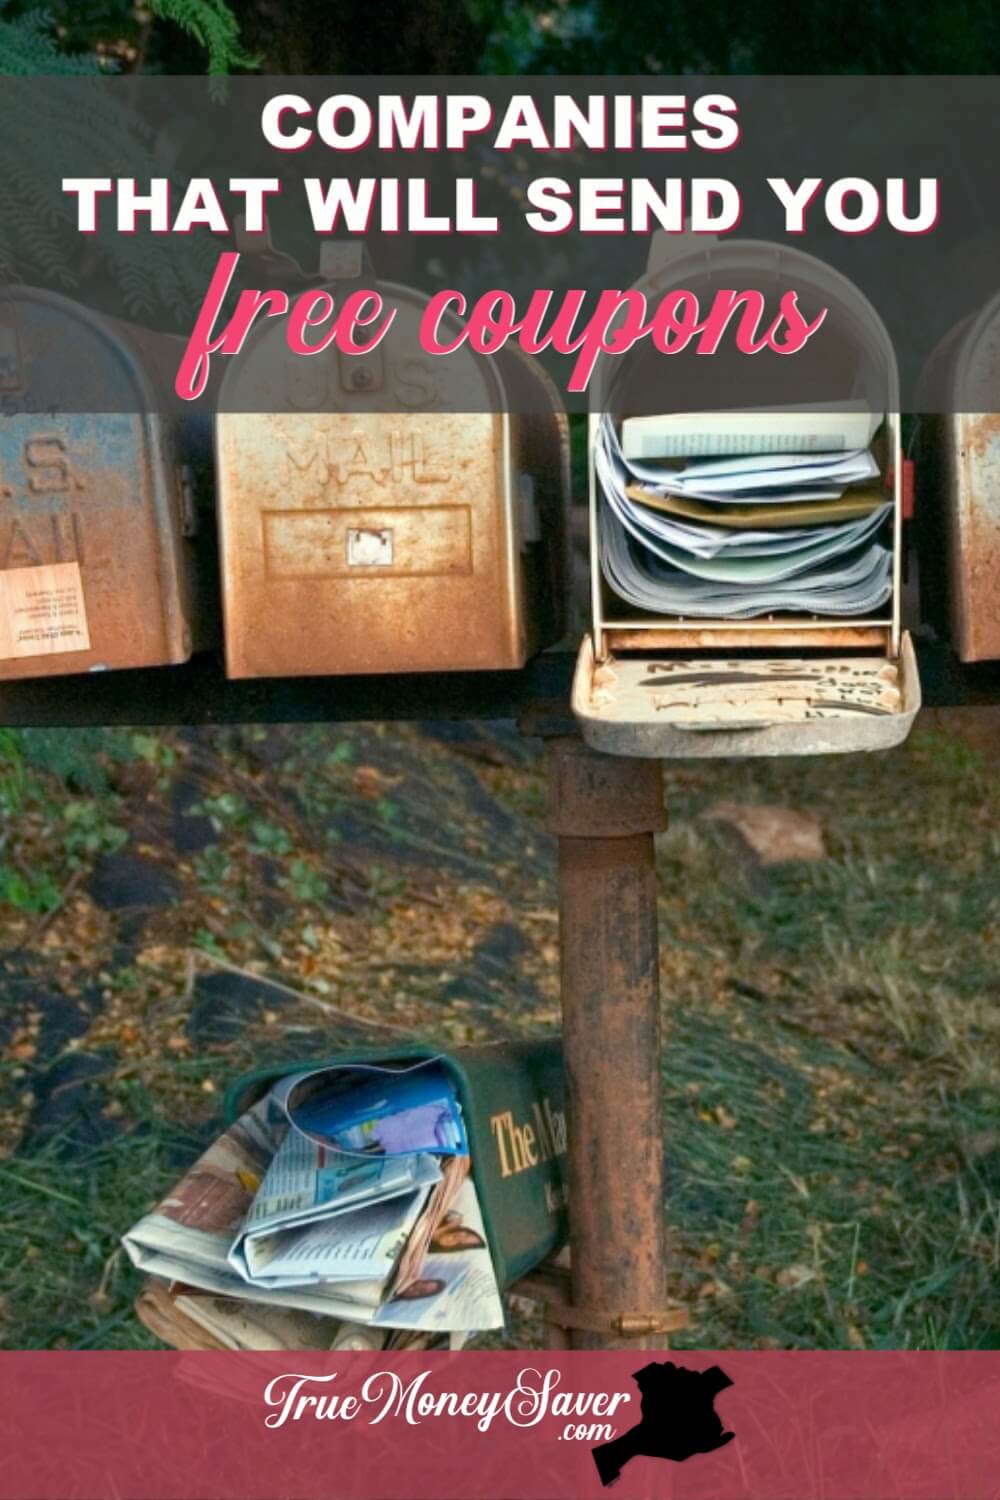 Get Happy Mail! These 250+ Companies Will Send You FREE Coupons!